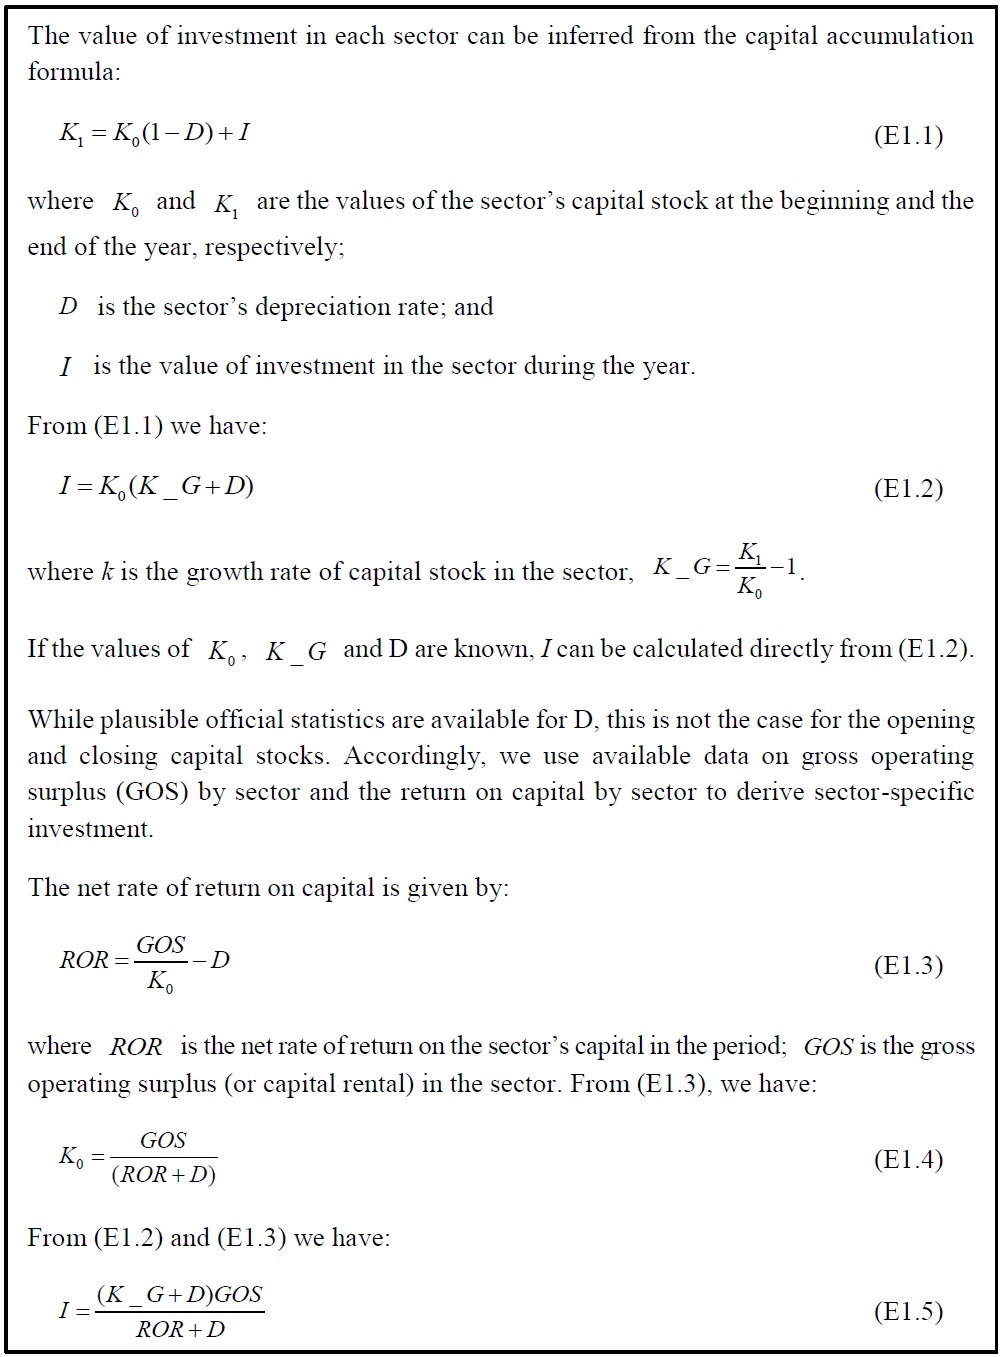 Derivation of the Equations in Figure 1